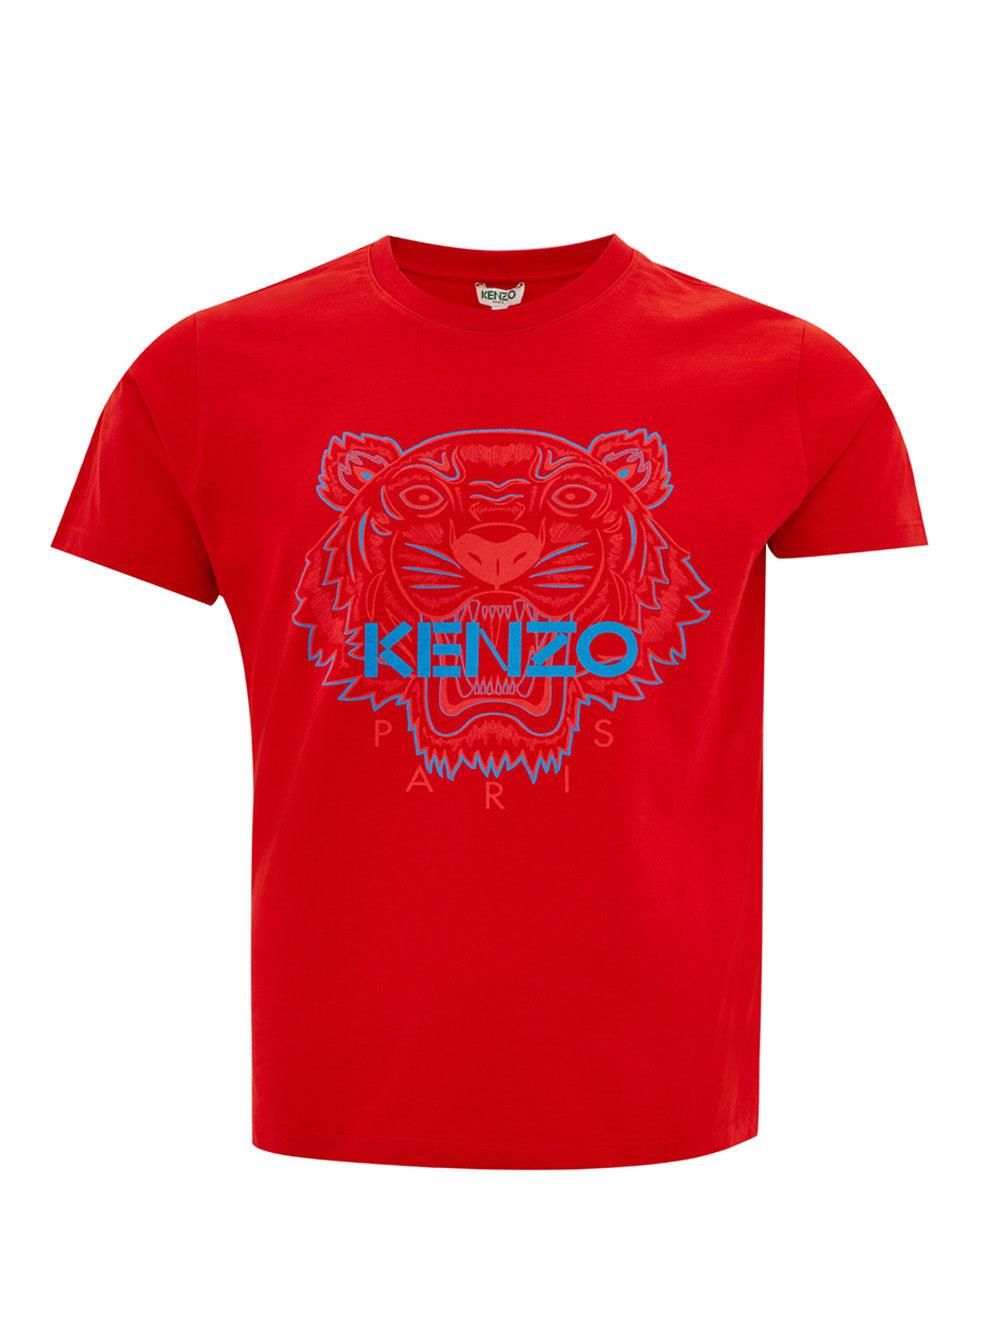 Kenzo Red Cotton T-Shirt with Front Tiger Print - Ellie Belle